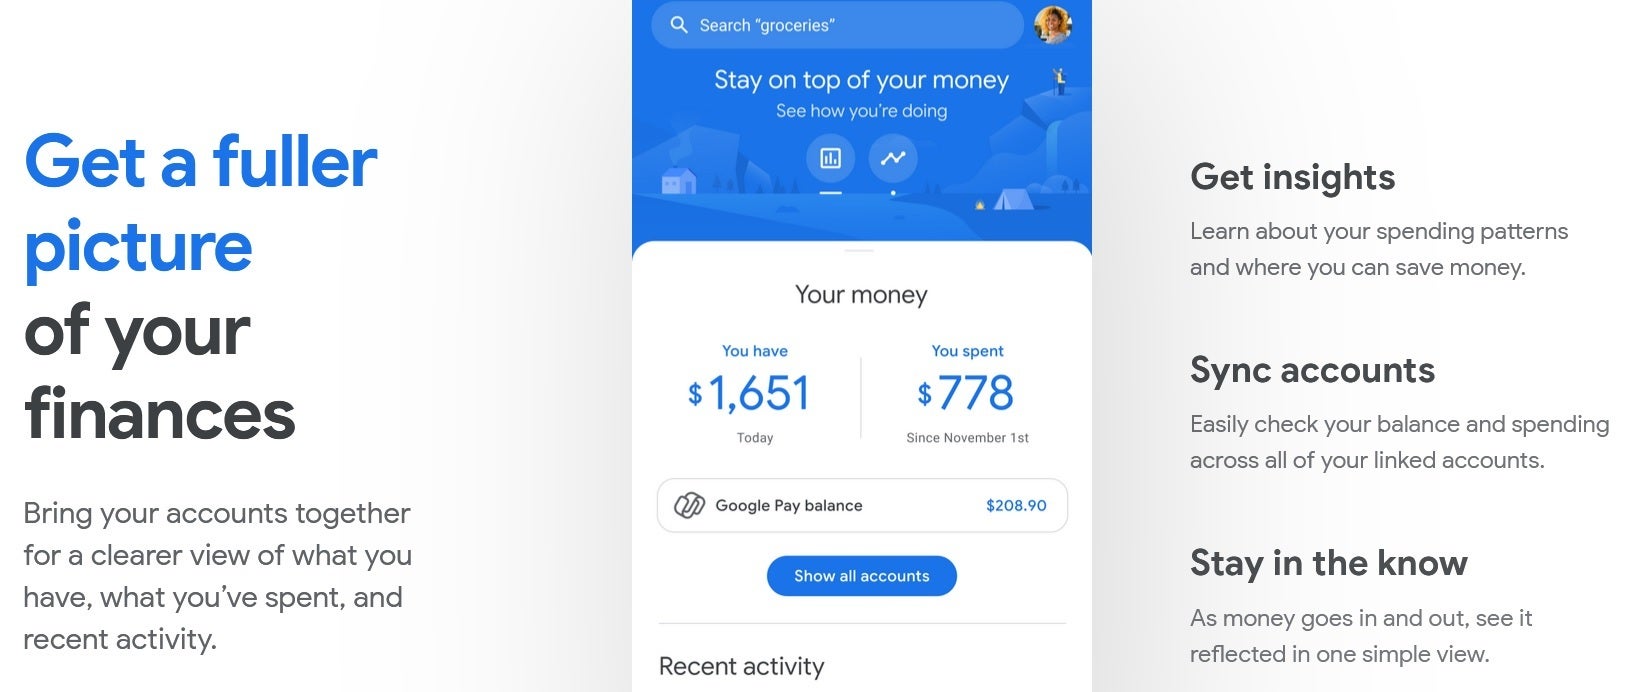 Keep track of your finances with the new Google Pay app - How Google is forcing you to install the new Google Pay app